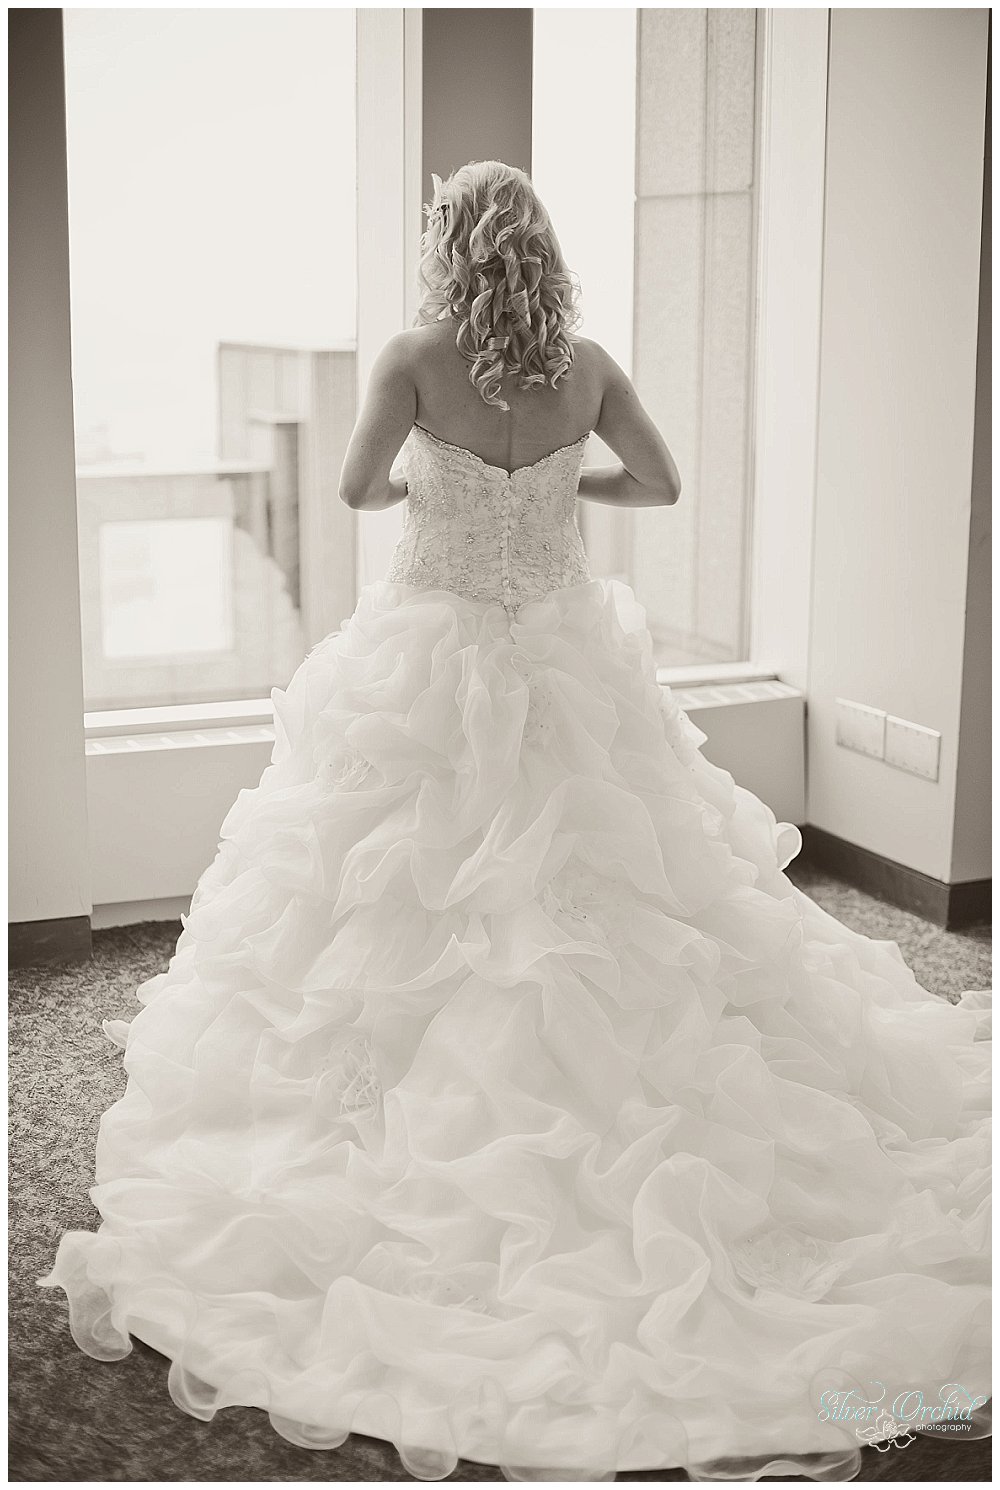 ©Silver Orchid Photography_wedding photography_FooteTopofTower_silverorchidphotography.com_0006.jpg